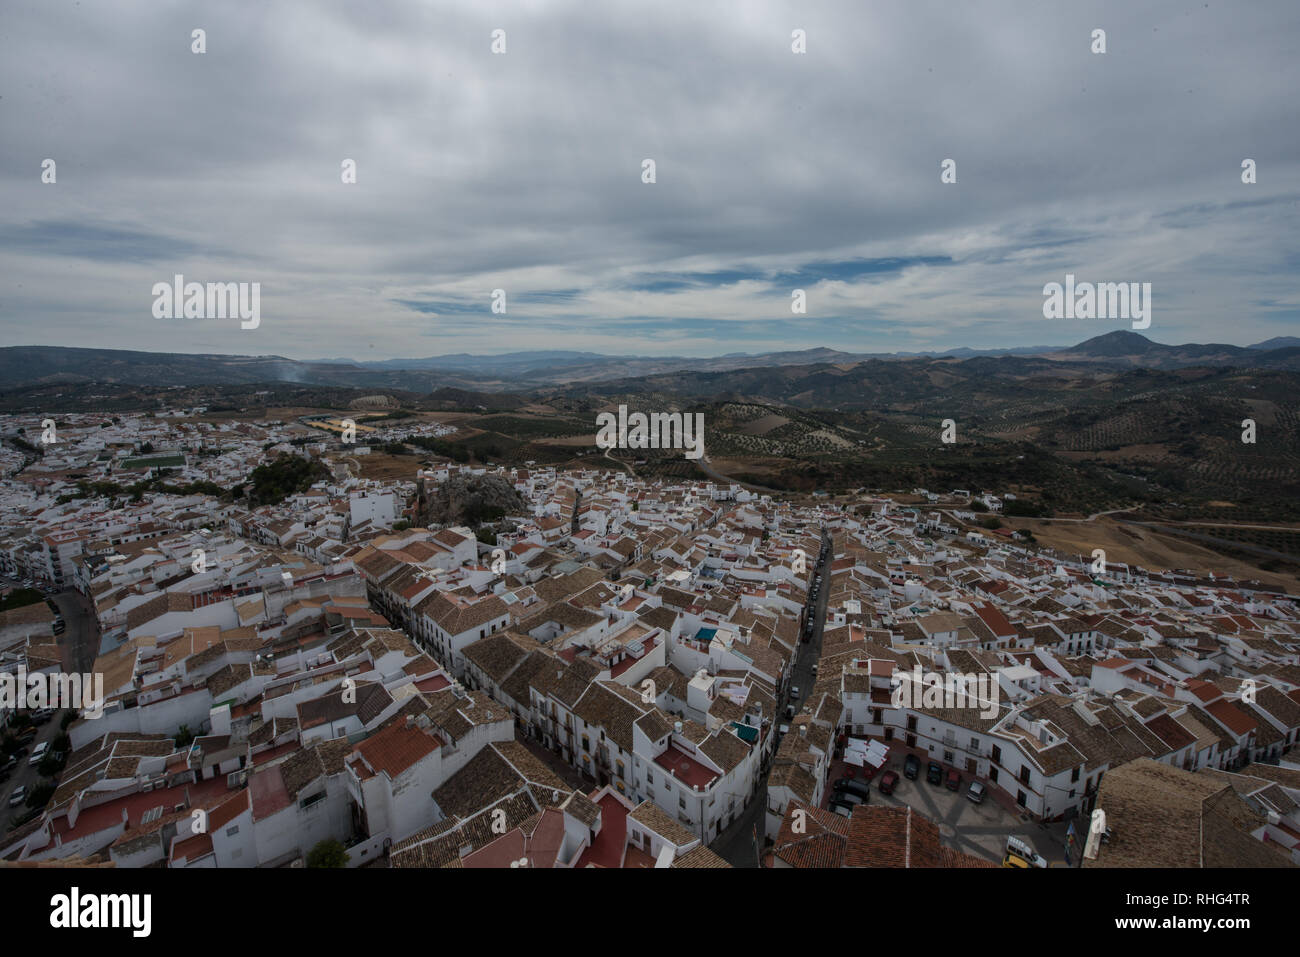 Pueblos blancos - White villages in Andalucia, Spain Stock Photo